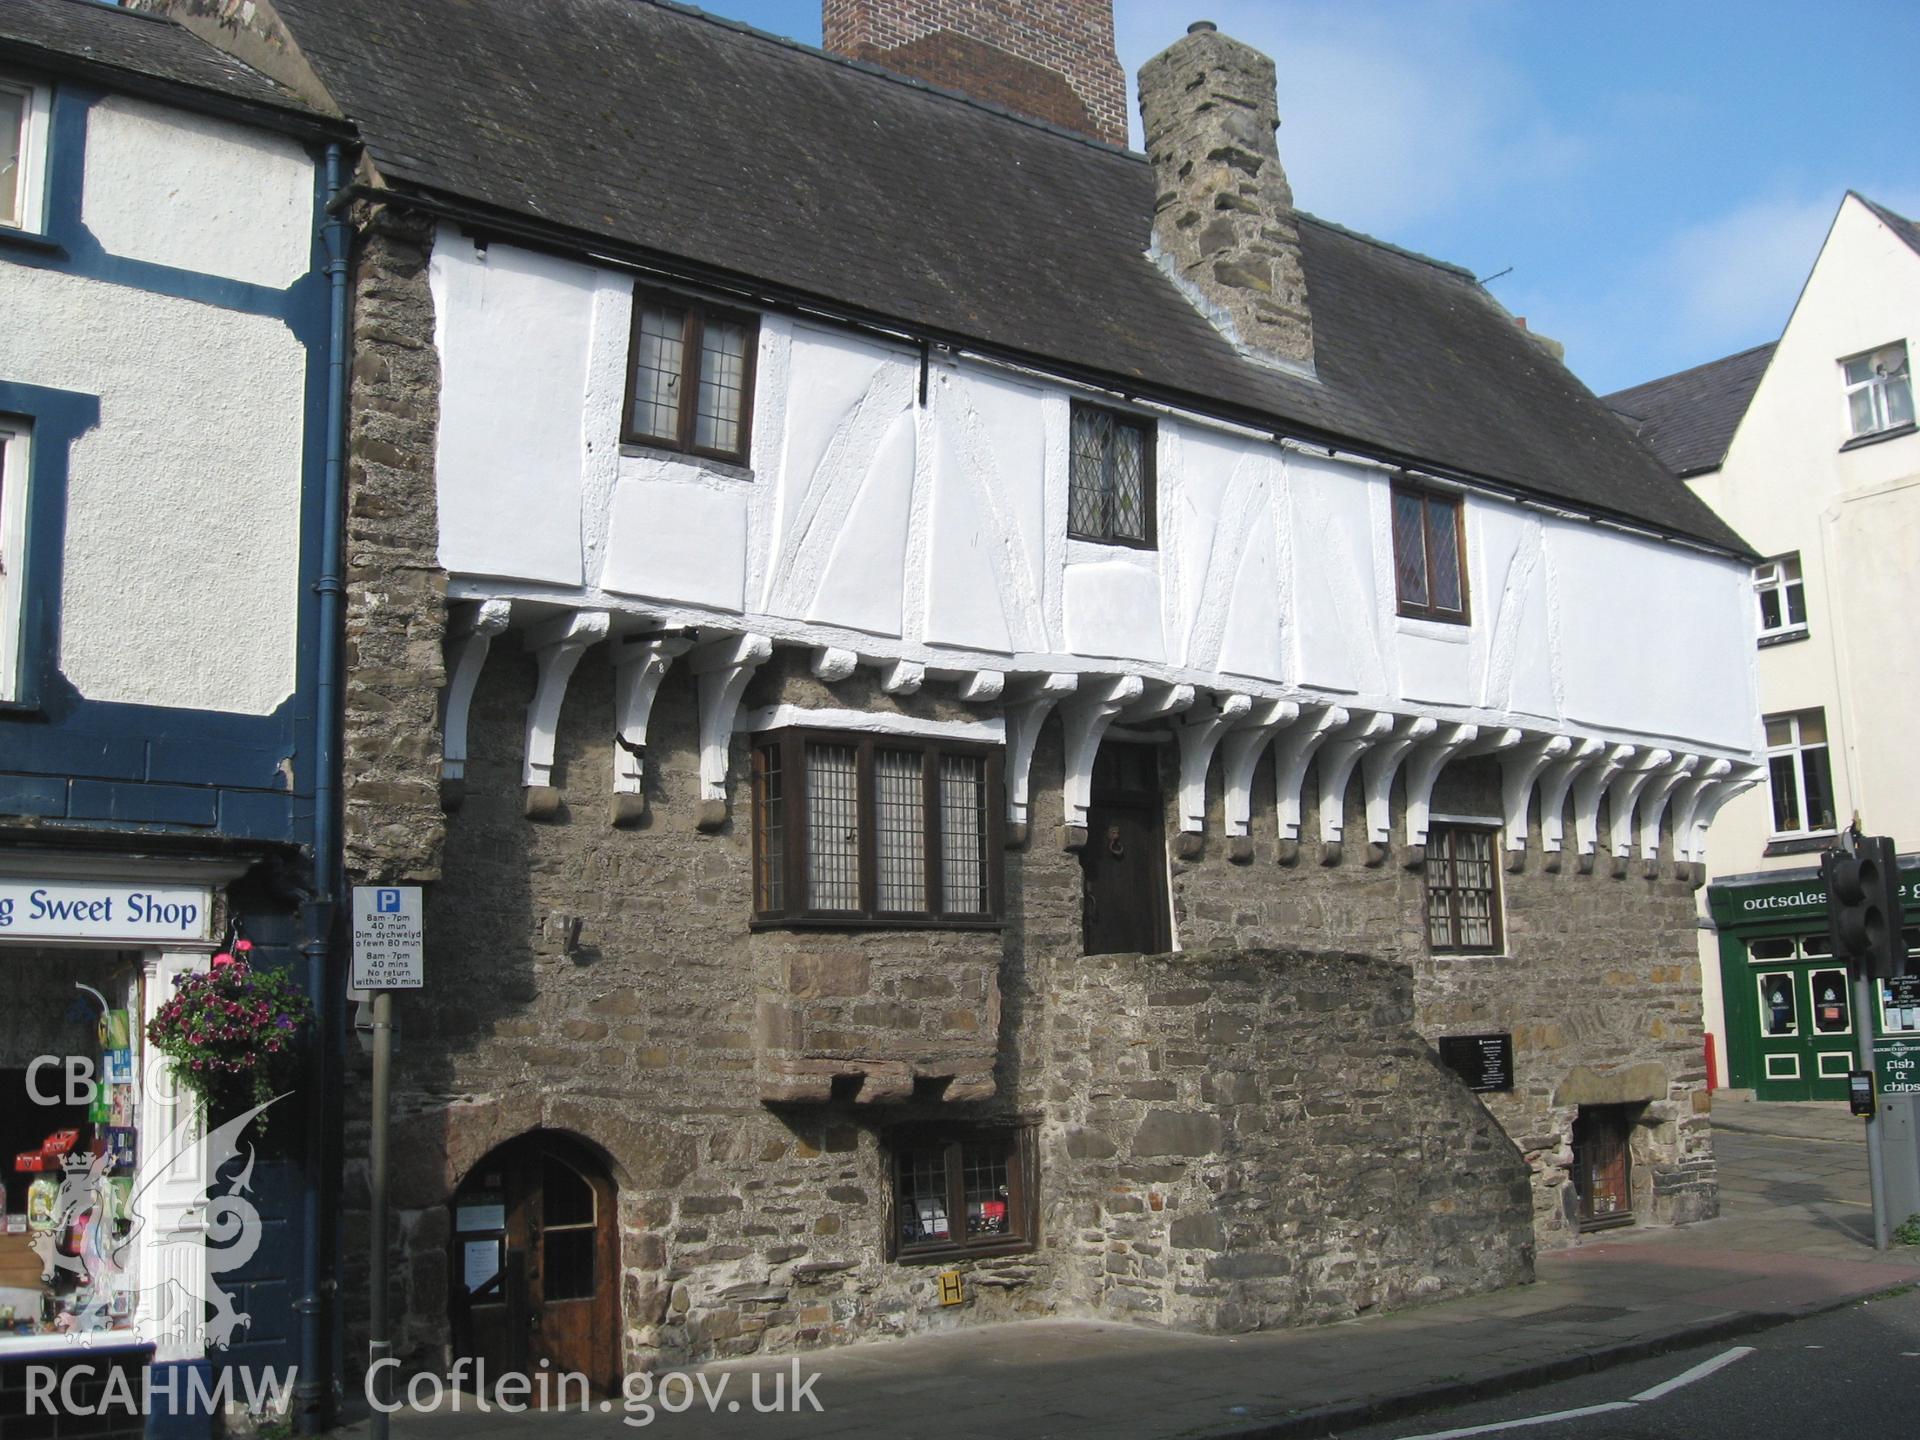 Colour photo of Aberconwy House, taken by Paul R. Davis and dated 11th May 2006.